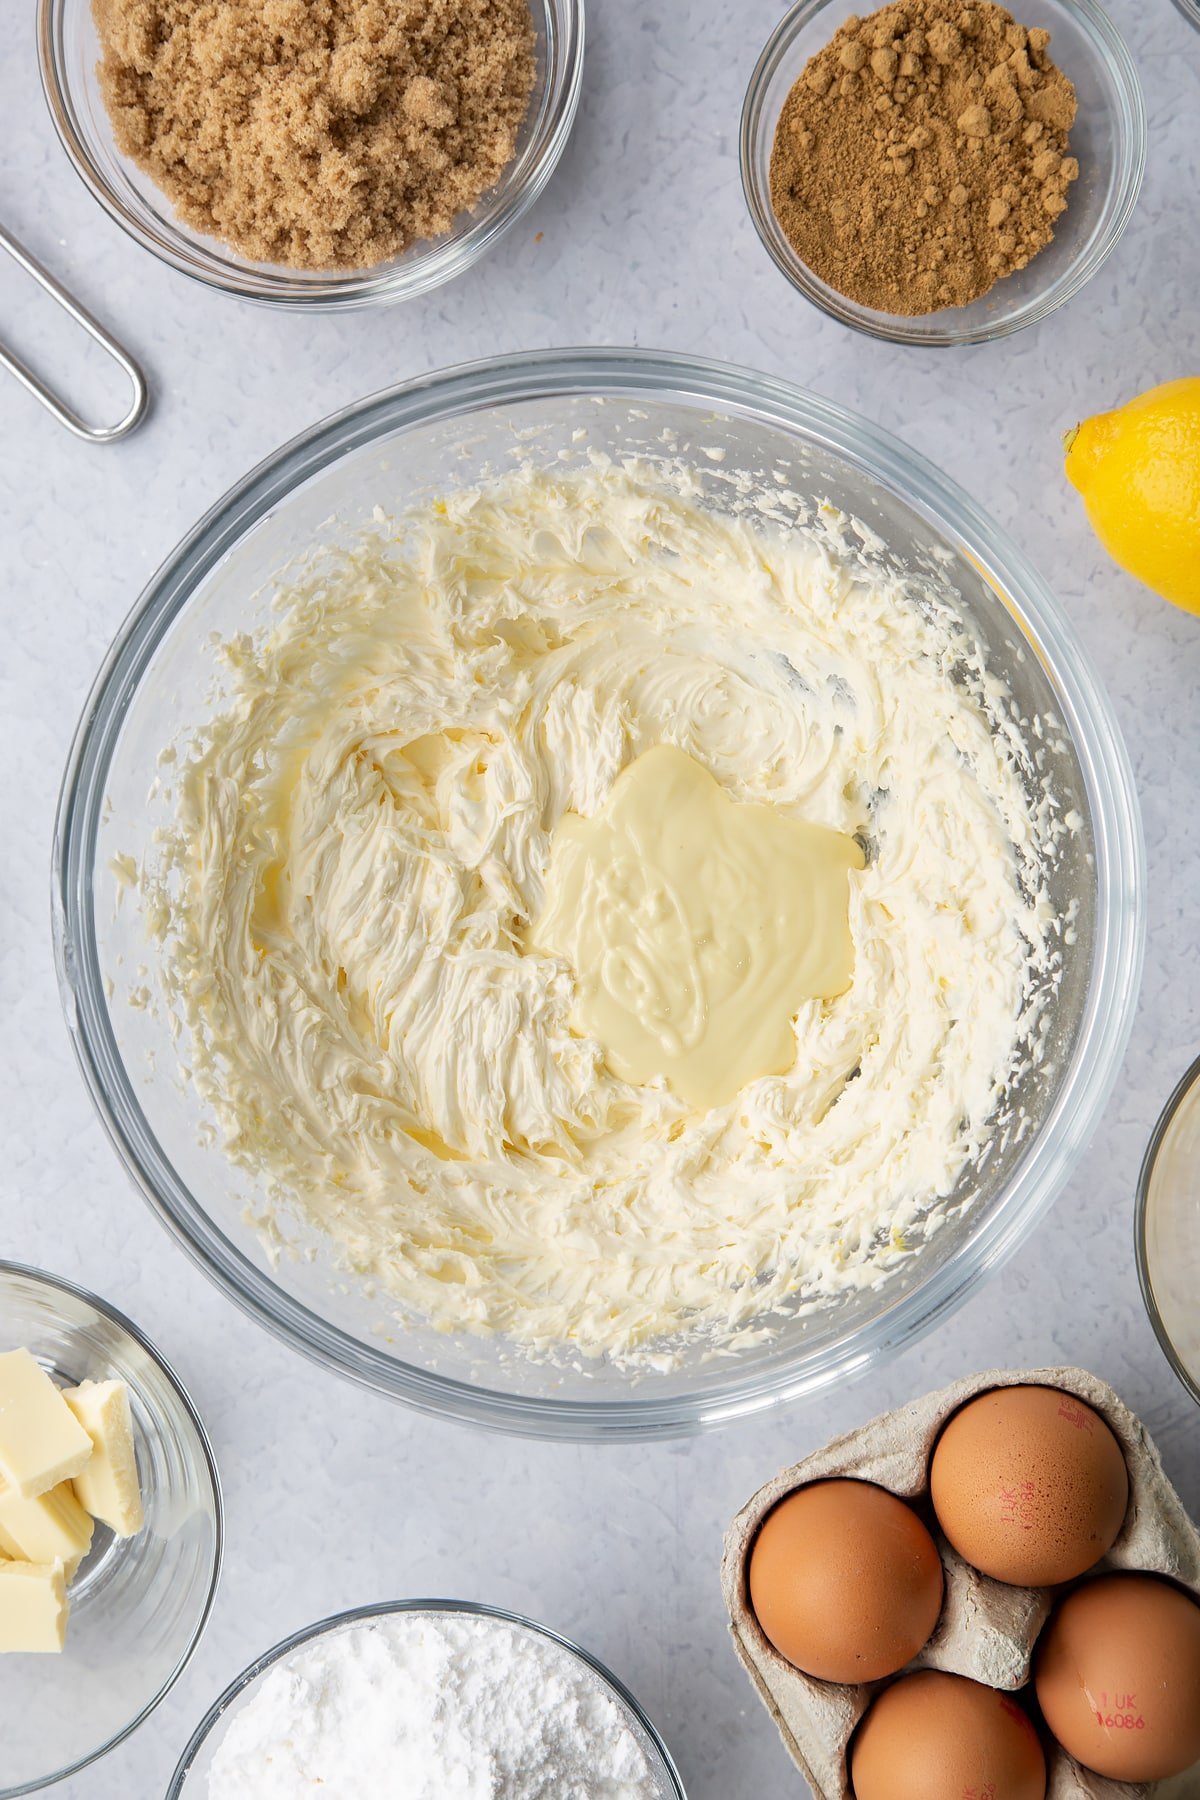 Lemon buttercream in a glass mixing bowl with white chocolate on top. Ingredients to make Gingerbread Swiss roll surround the bowl.